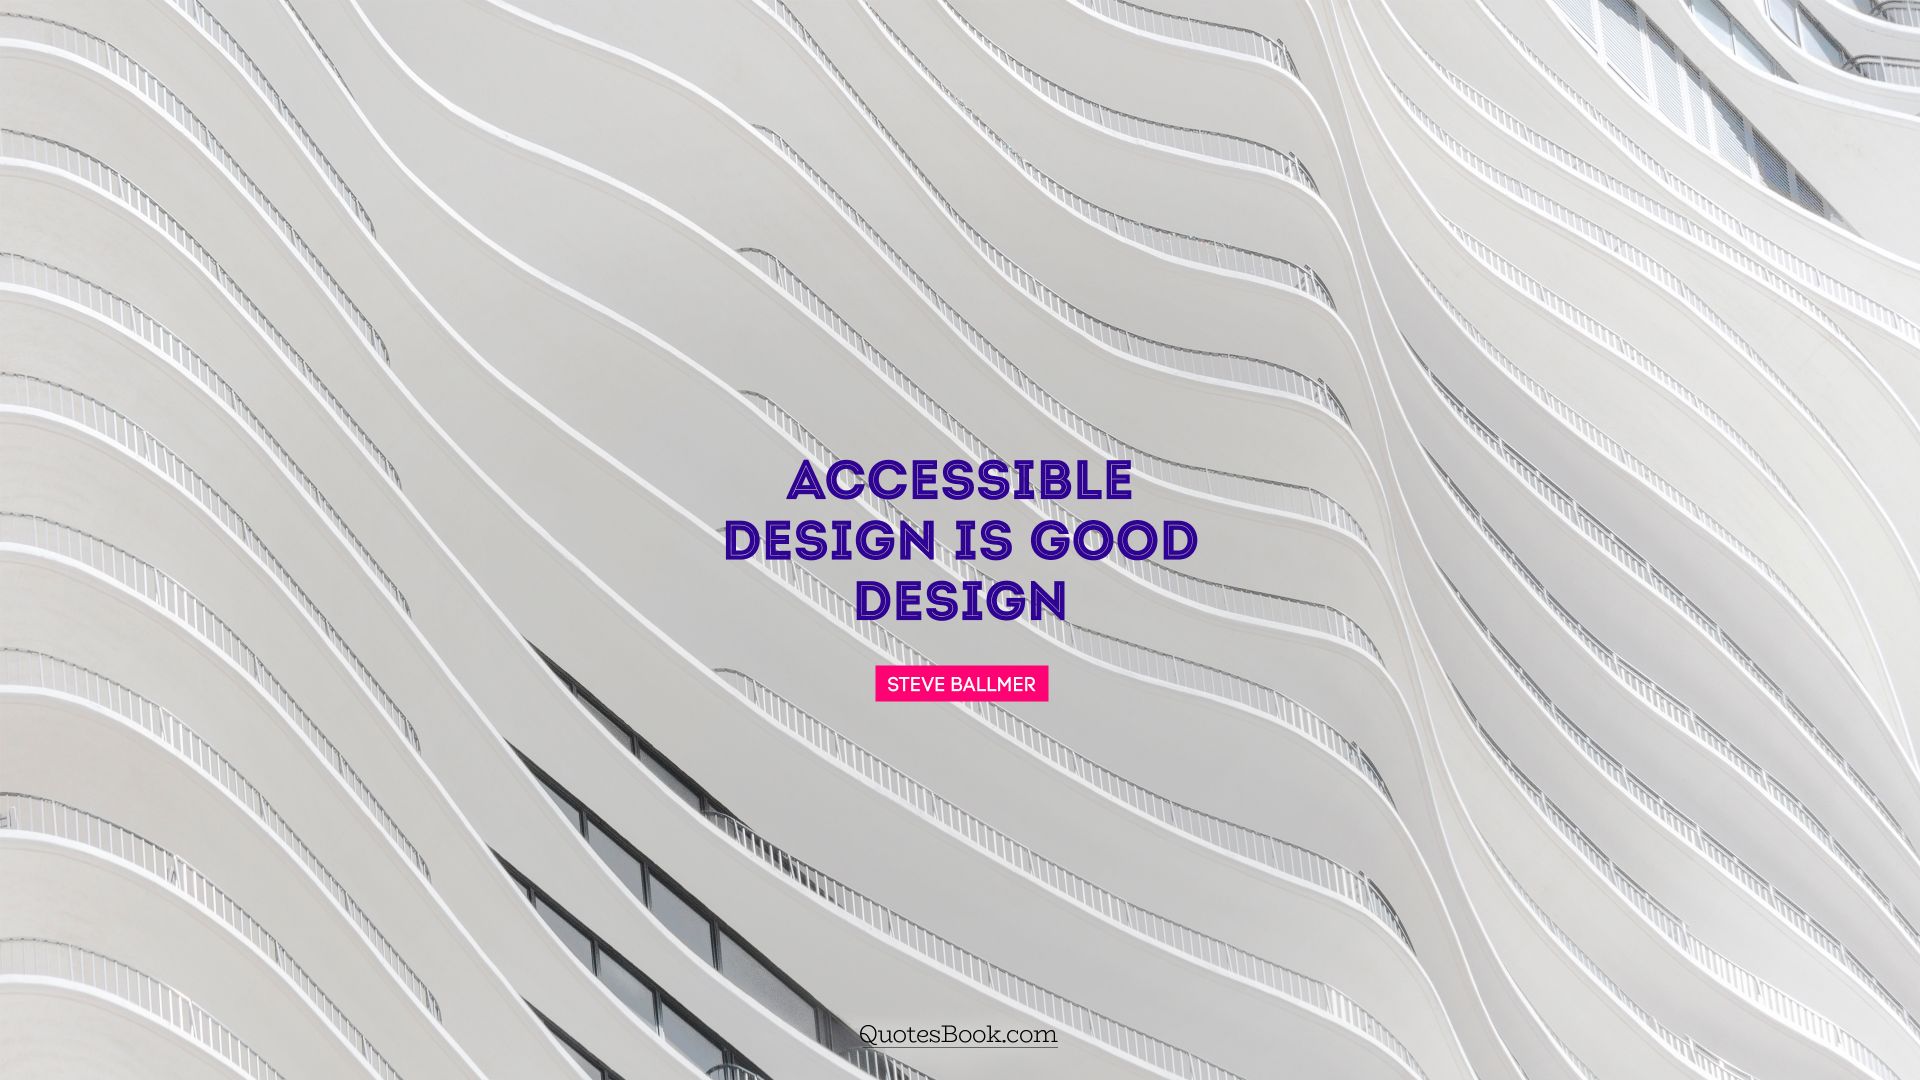 Accessible design is good design. - Quote by Steve Ballmer